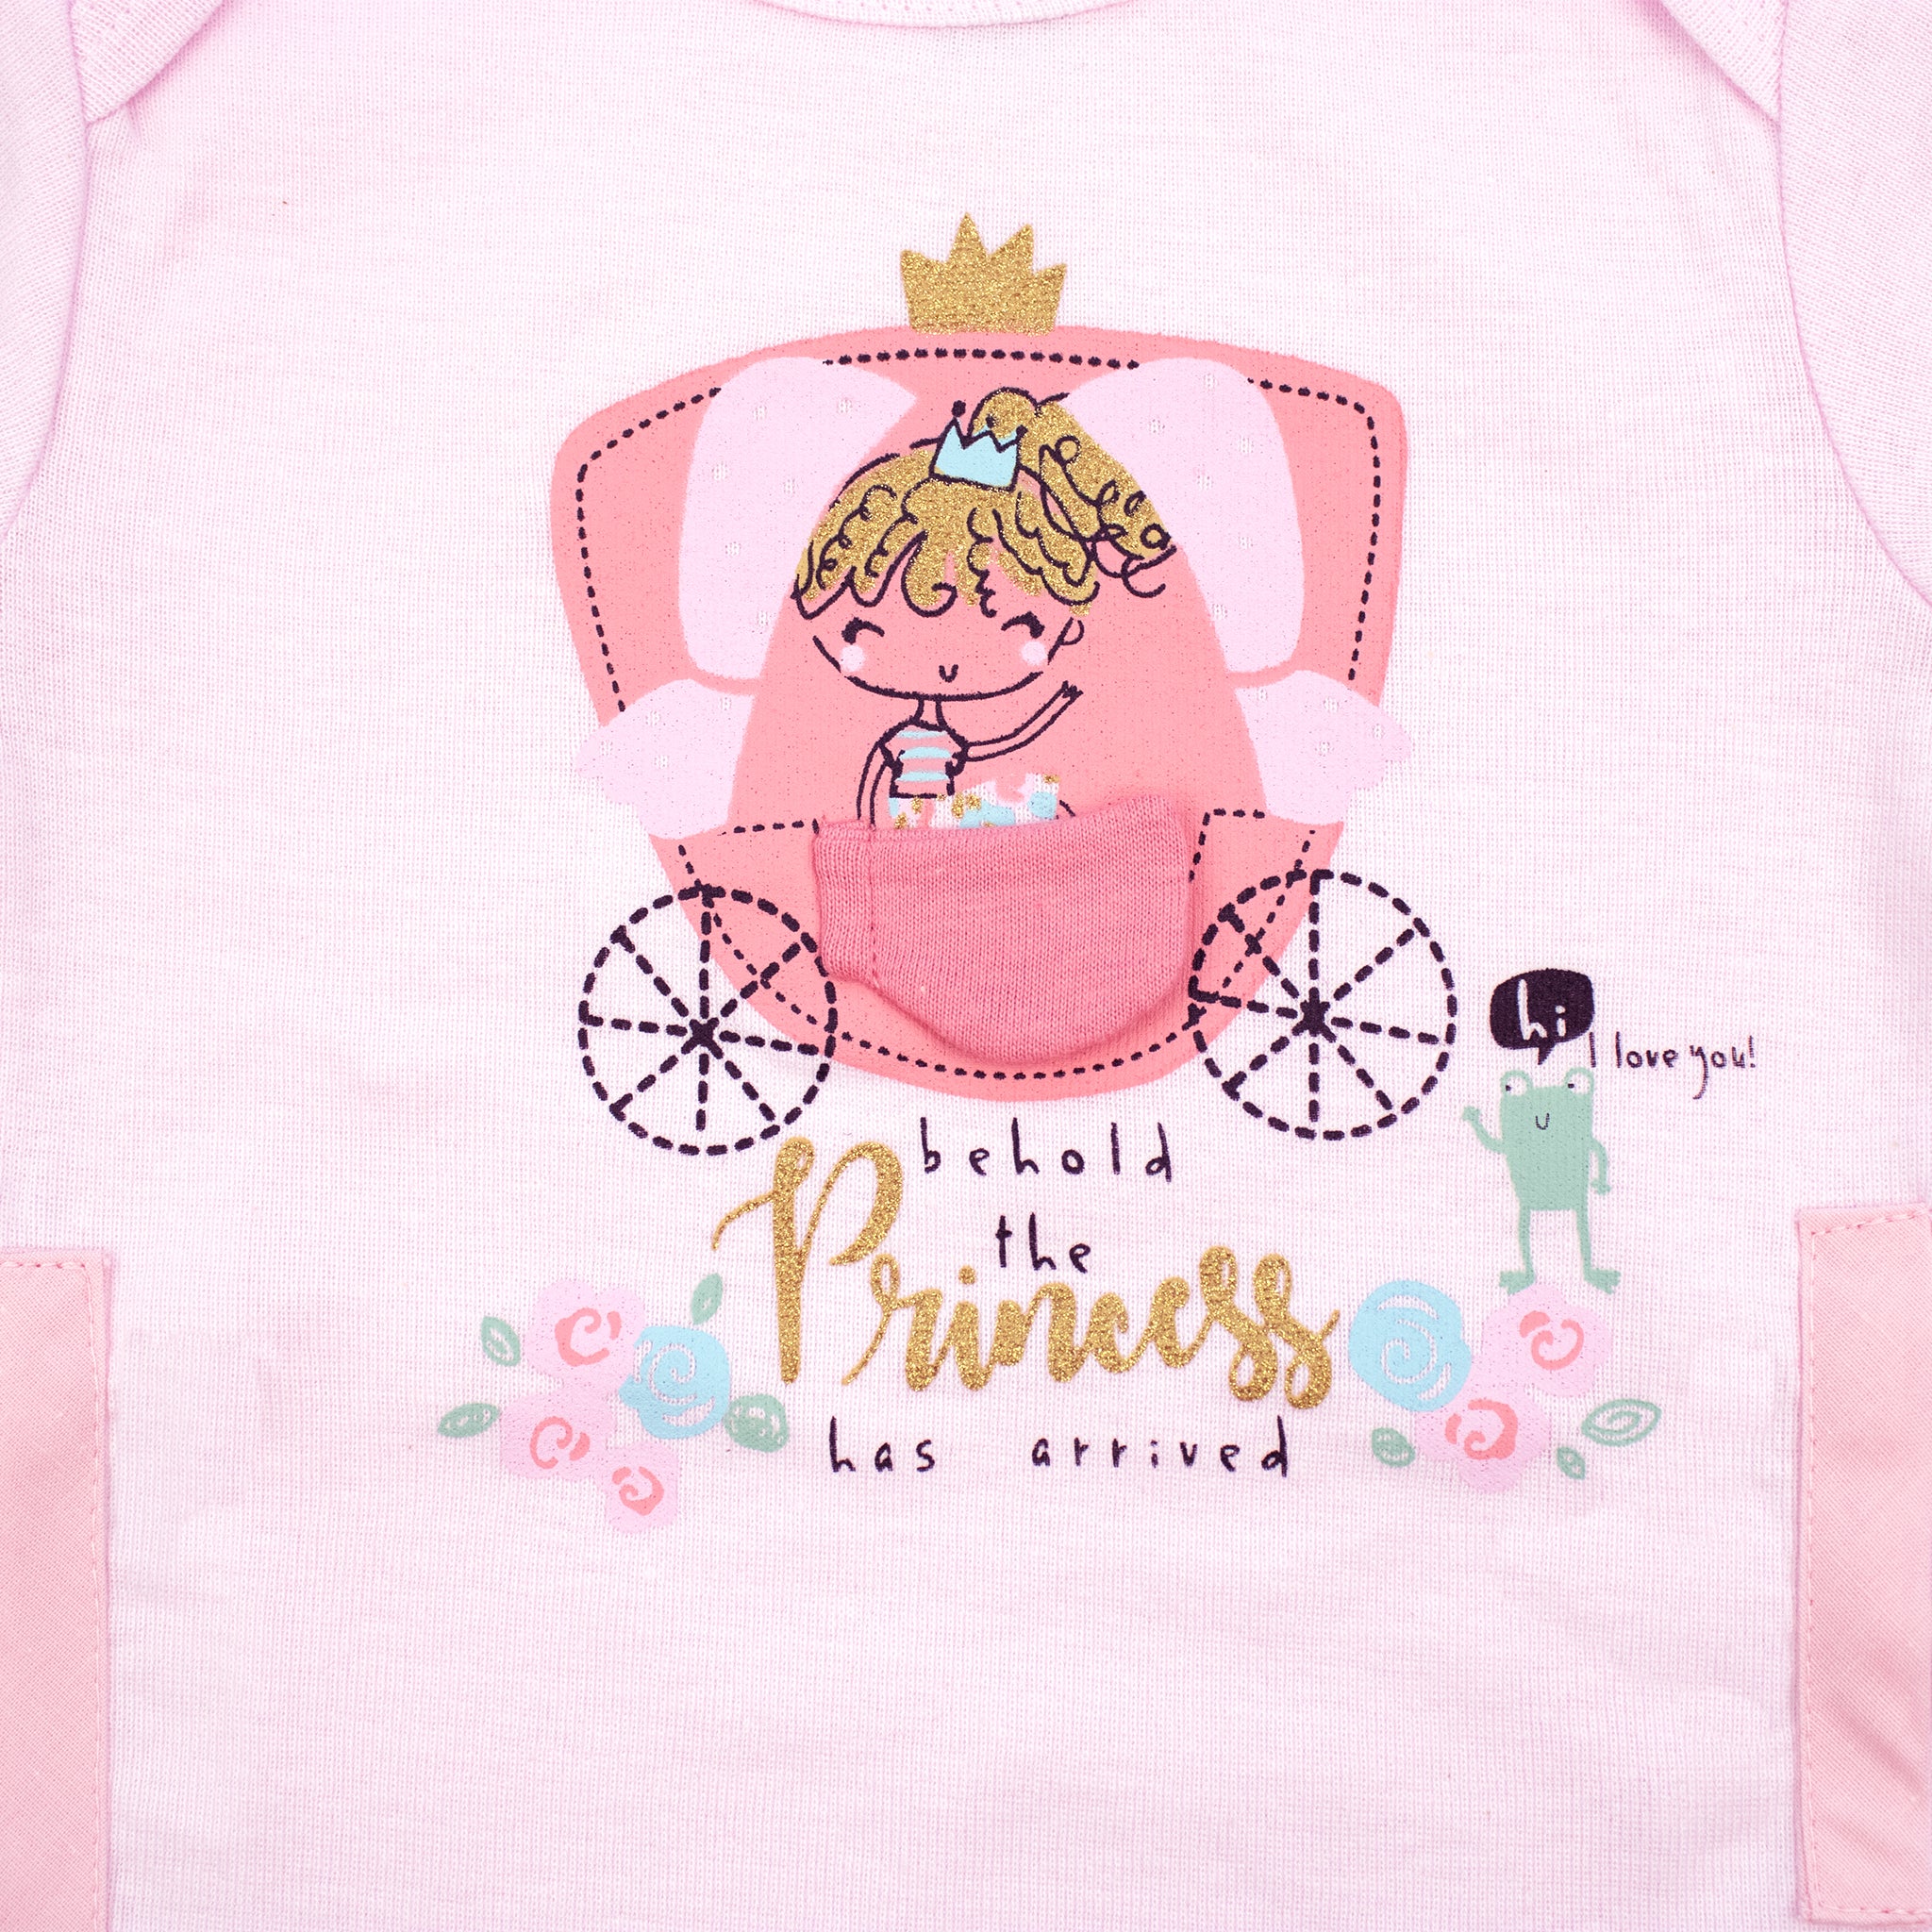 Pink Princess Carriage G-Tube Short Sleeve Baby Onesie FINAL CLEARANCE